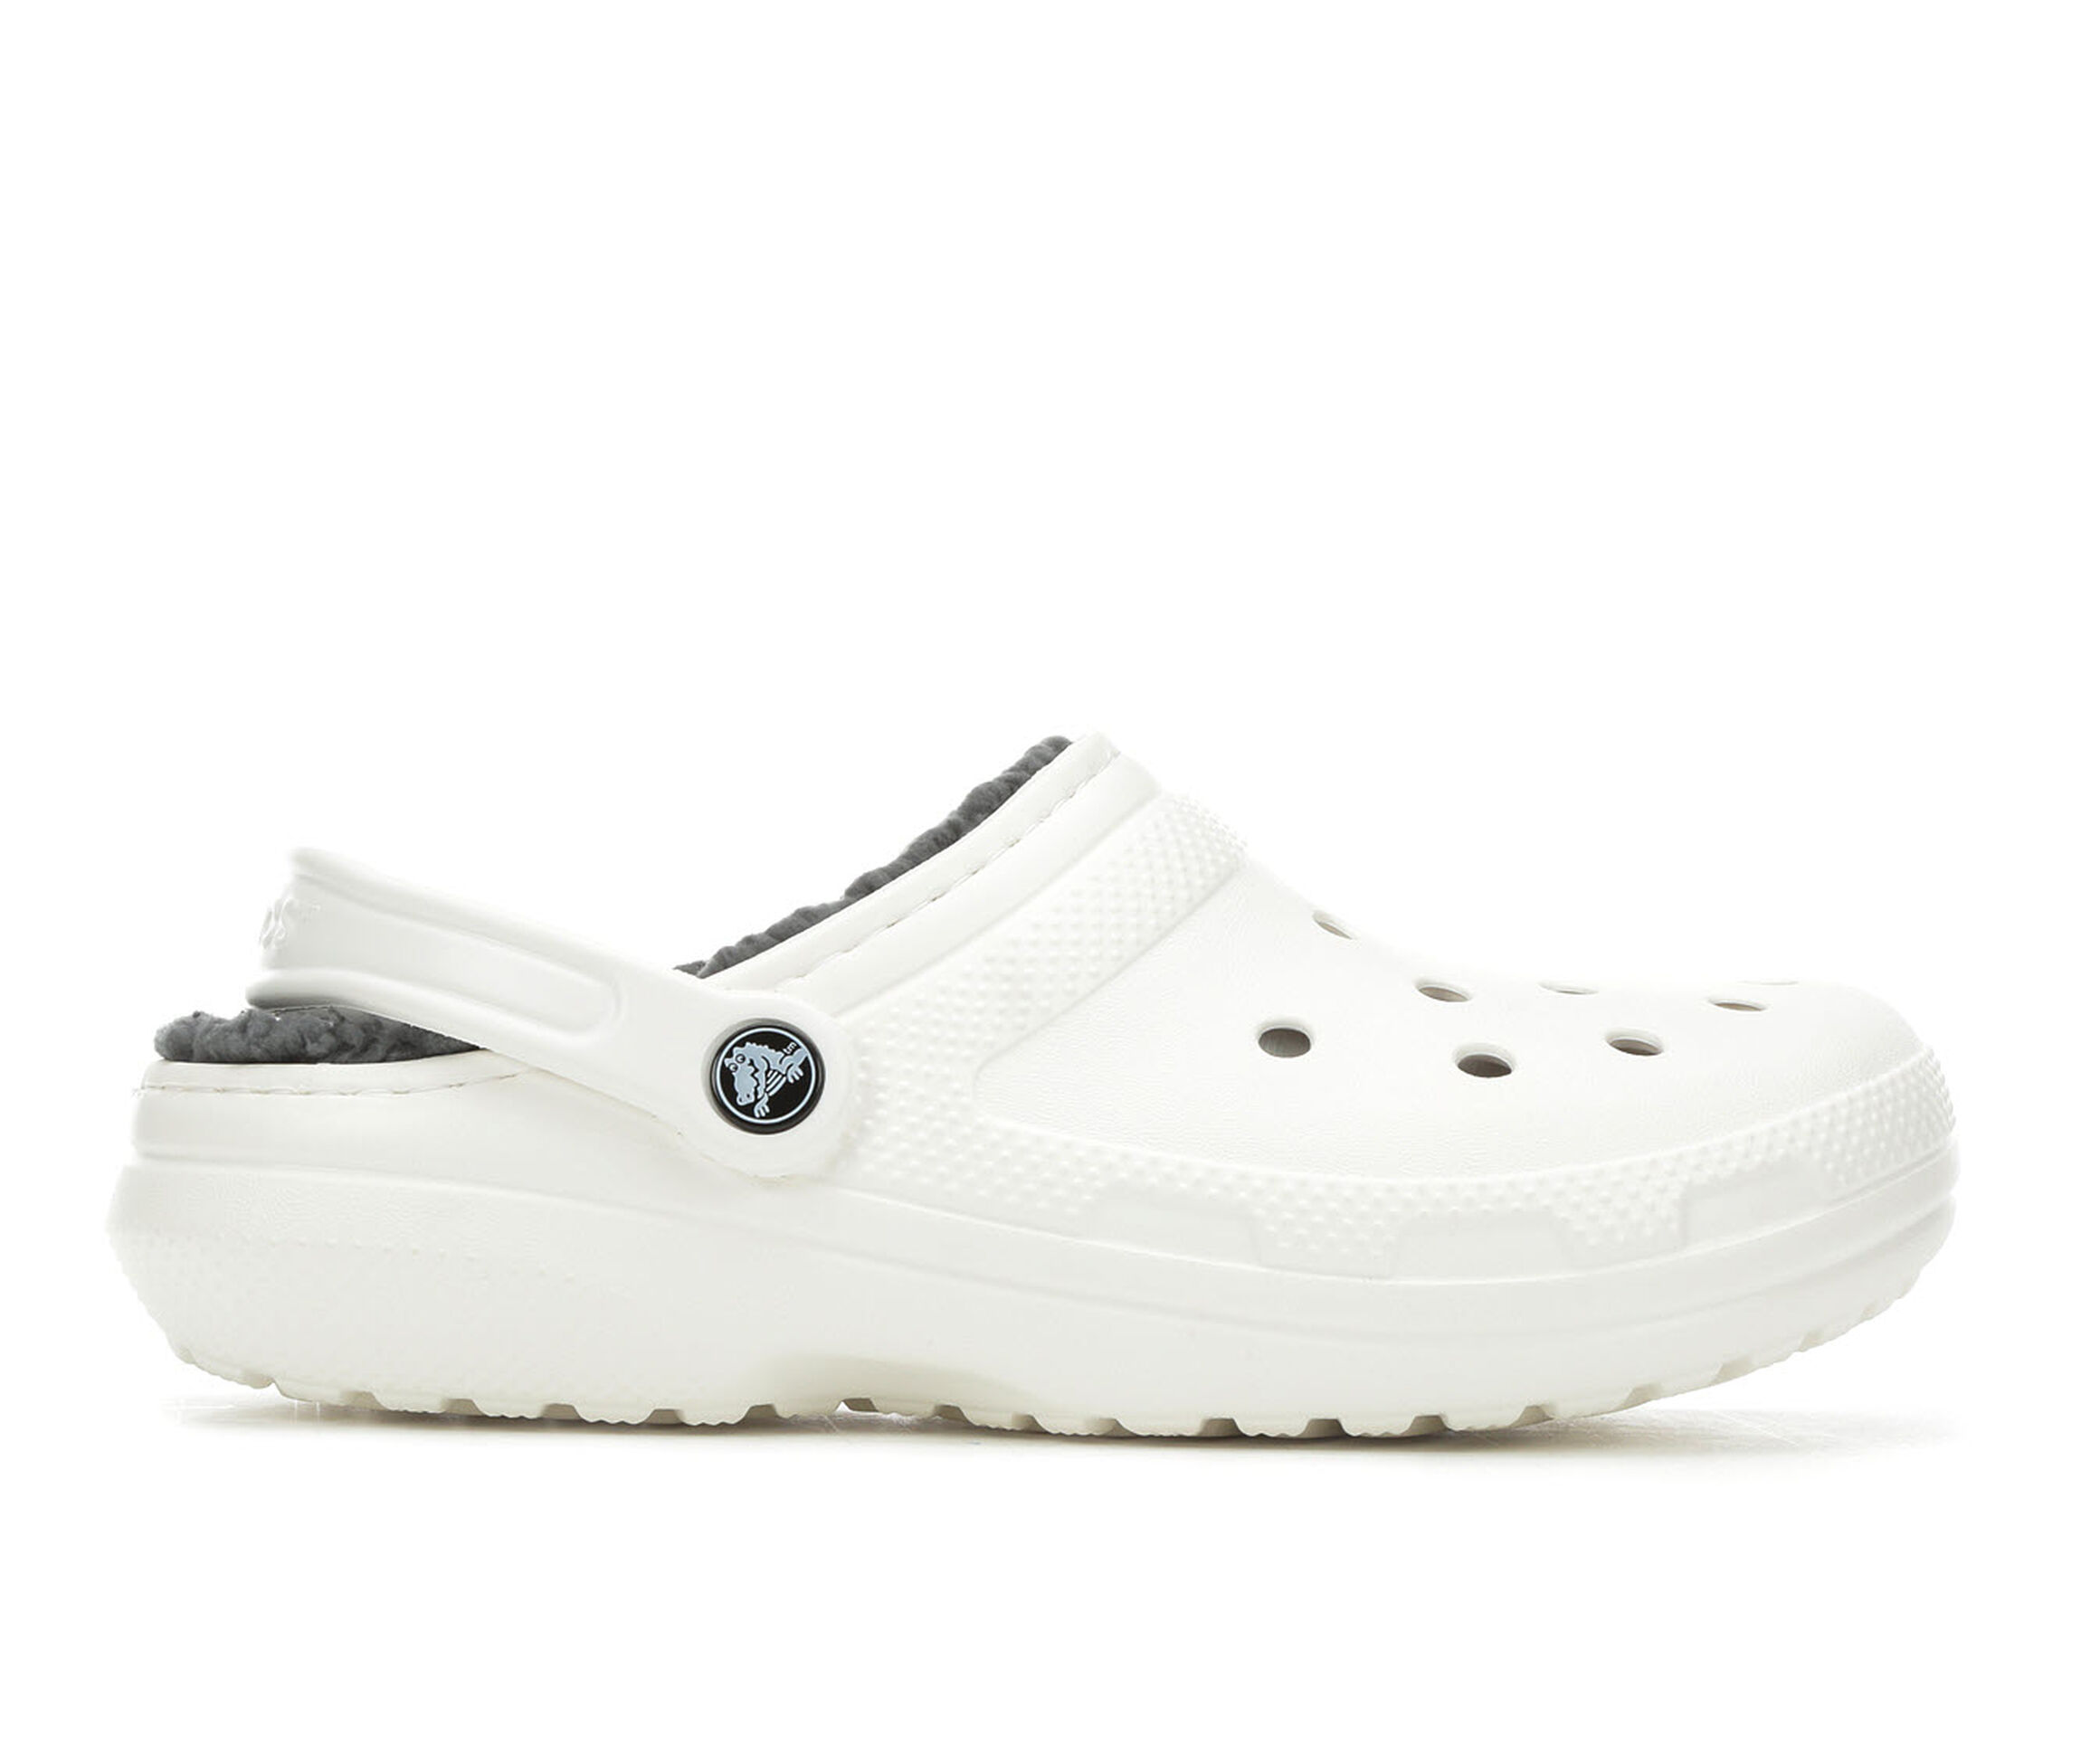 white lined crocs size 7